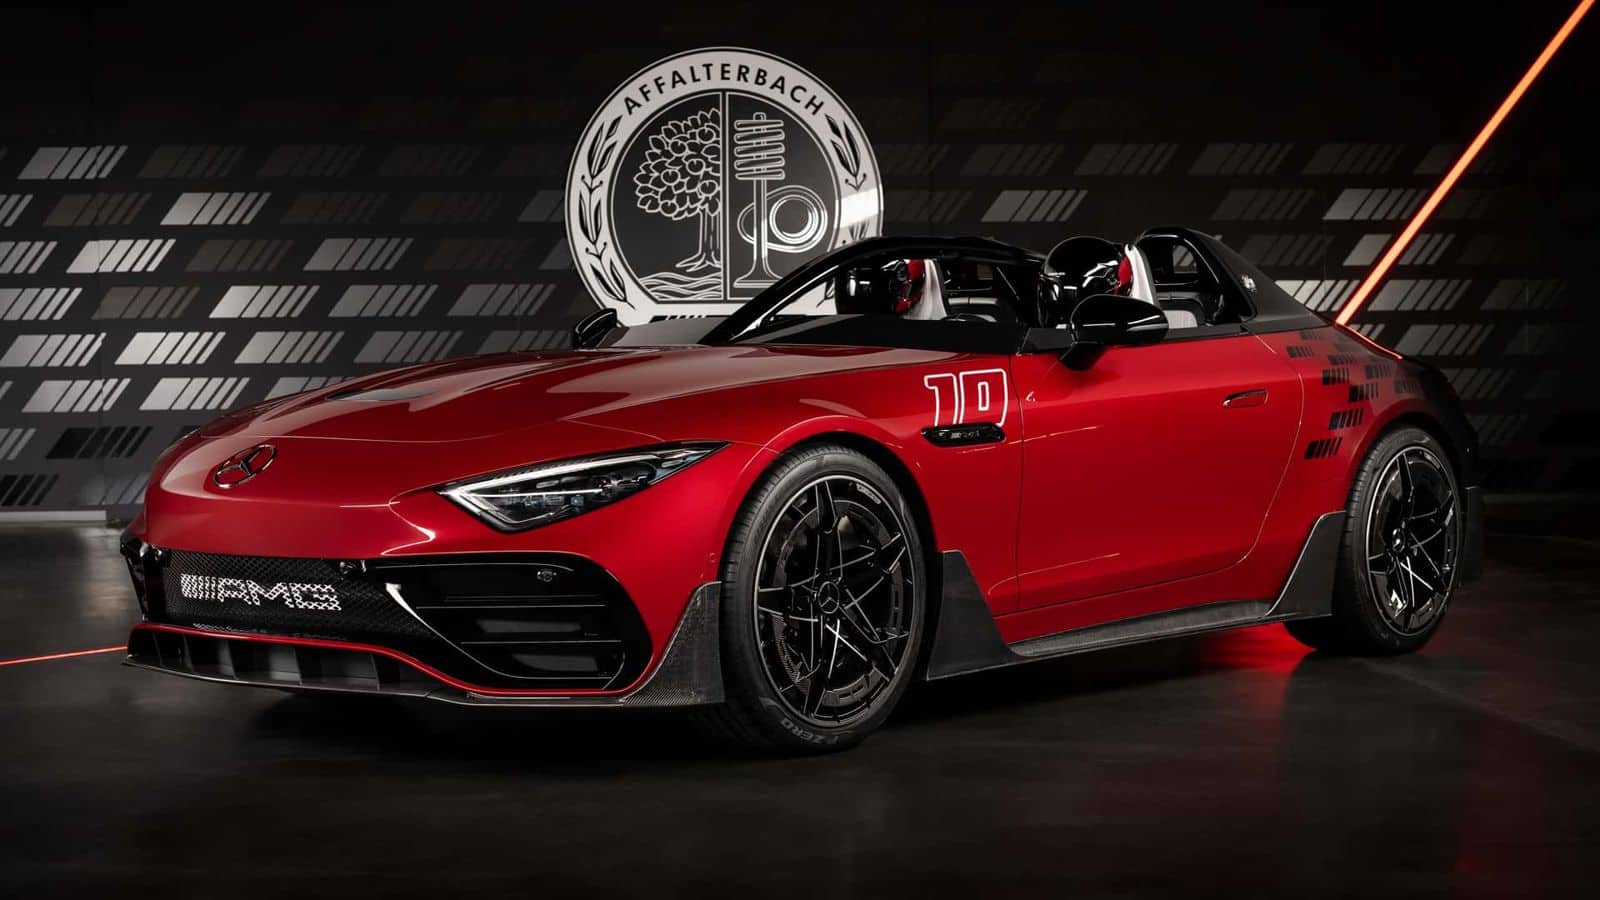 Mercedes-AMG unveils PureSpeed open-top roadster limited to 250 units